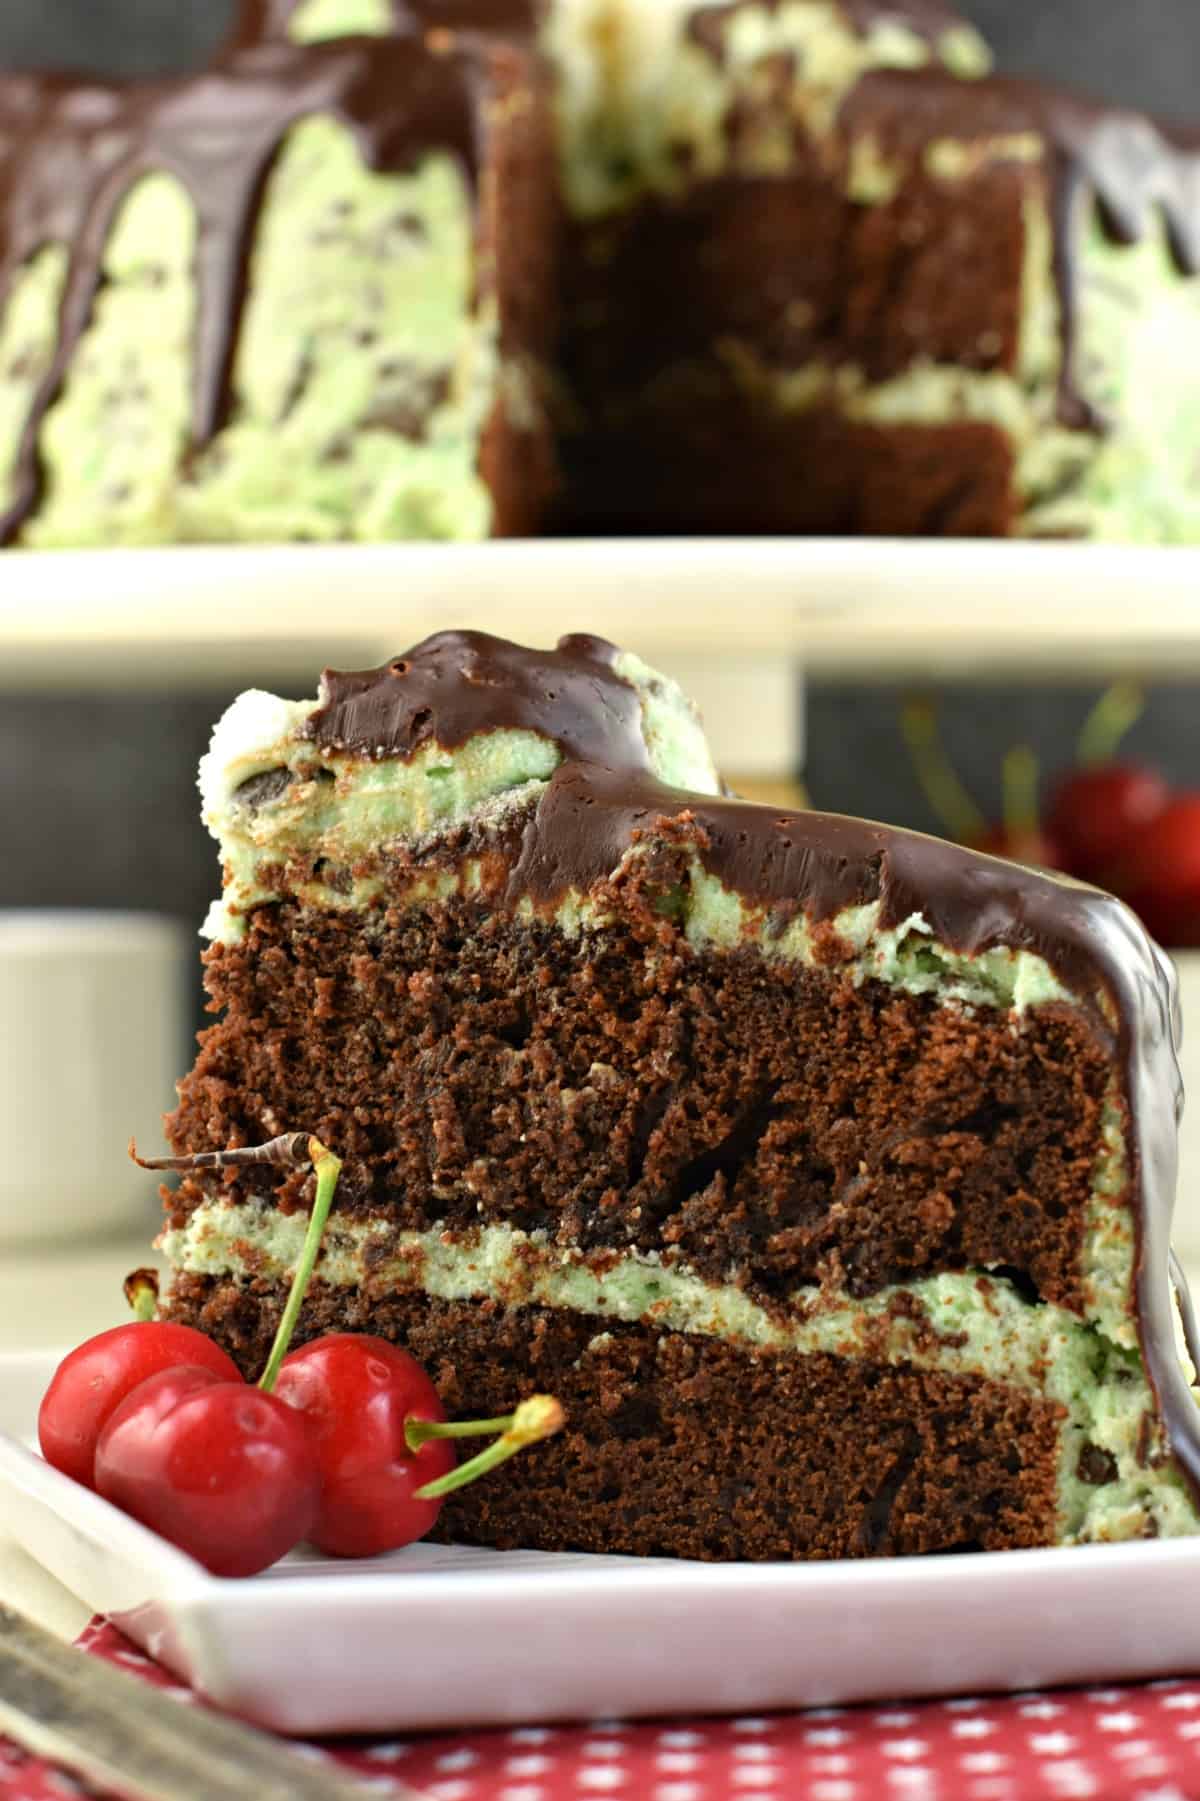 Slice of chocolate cake on a white plate, with full size cake in background. Cake topped with mint chocolate chip frosting.